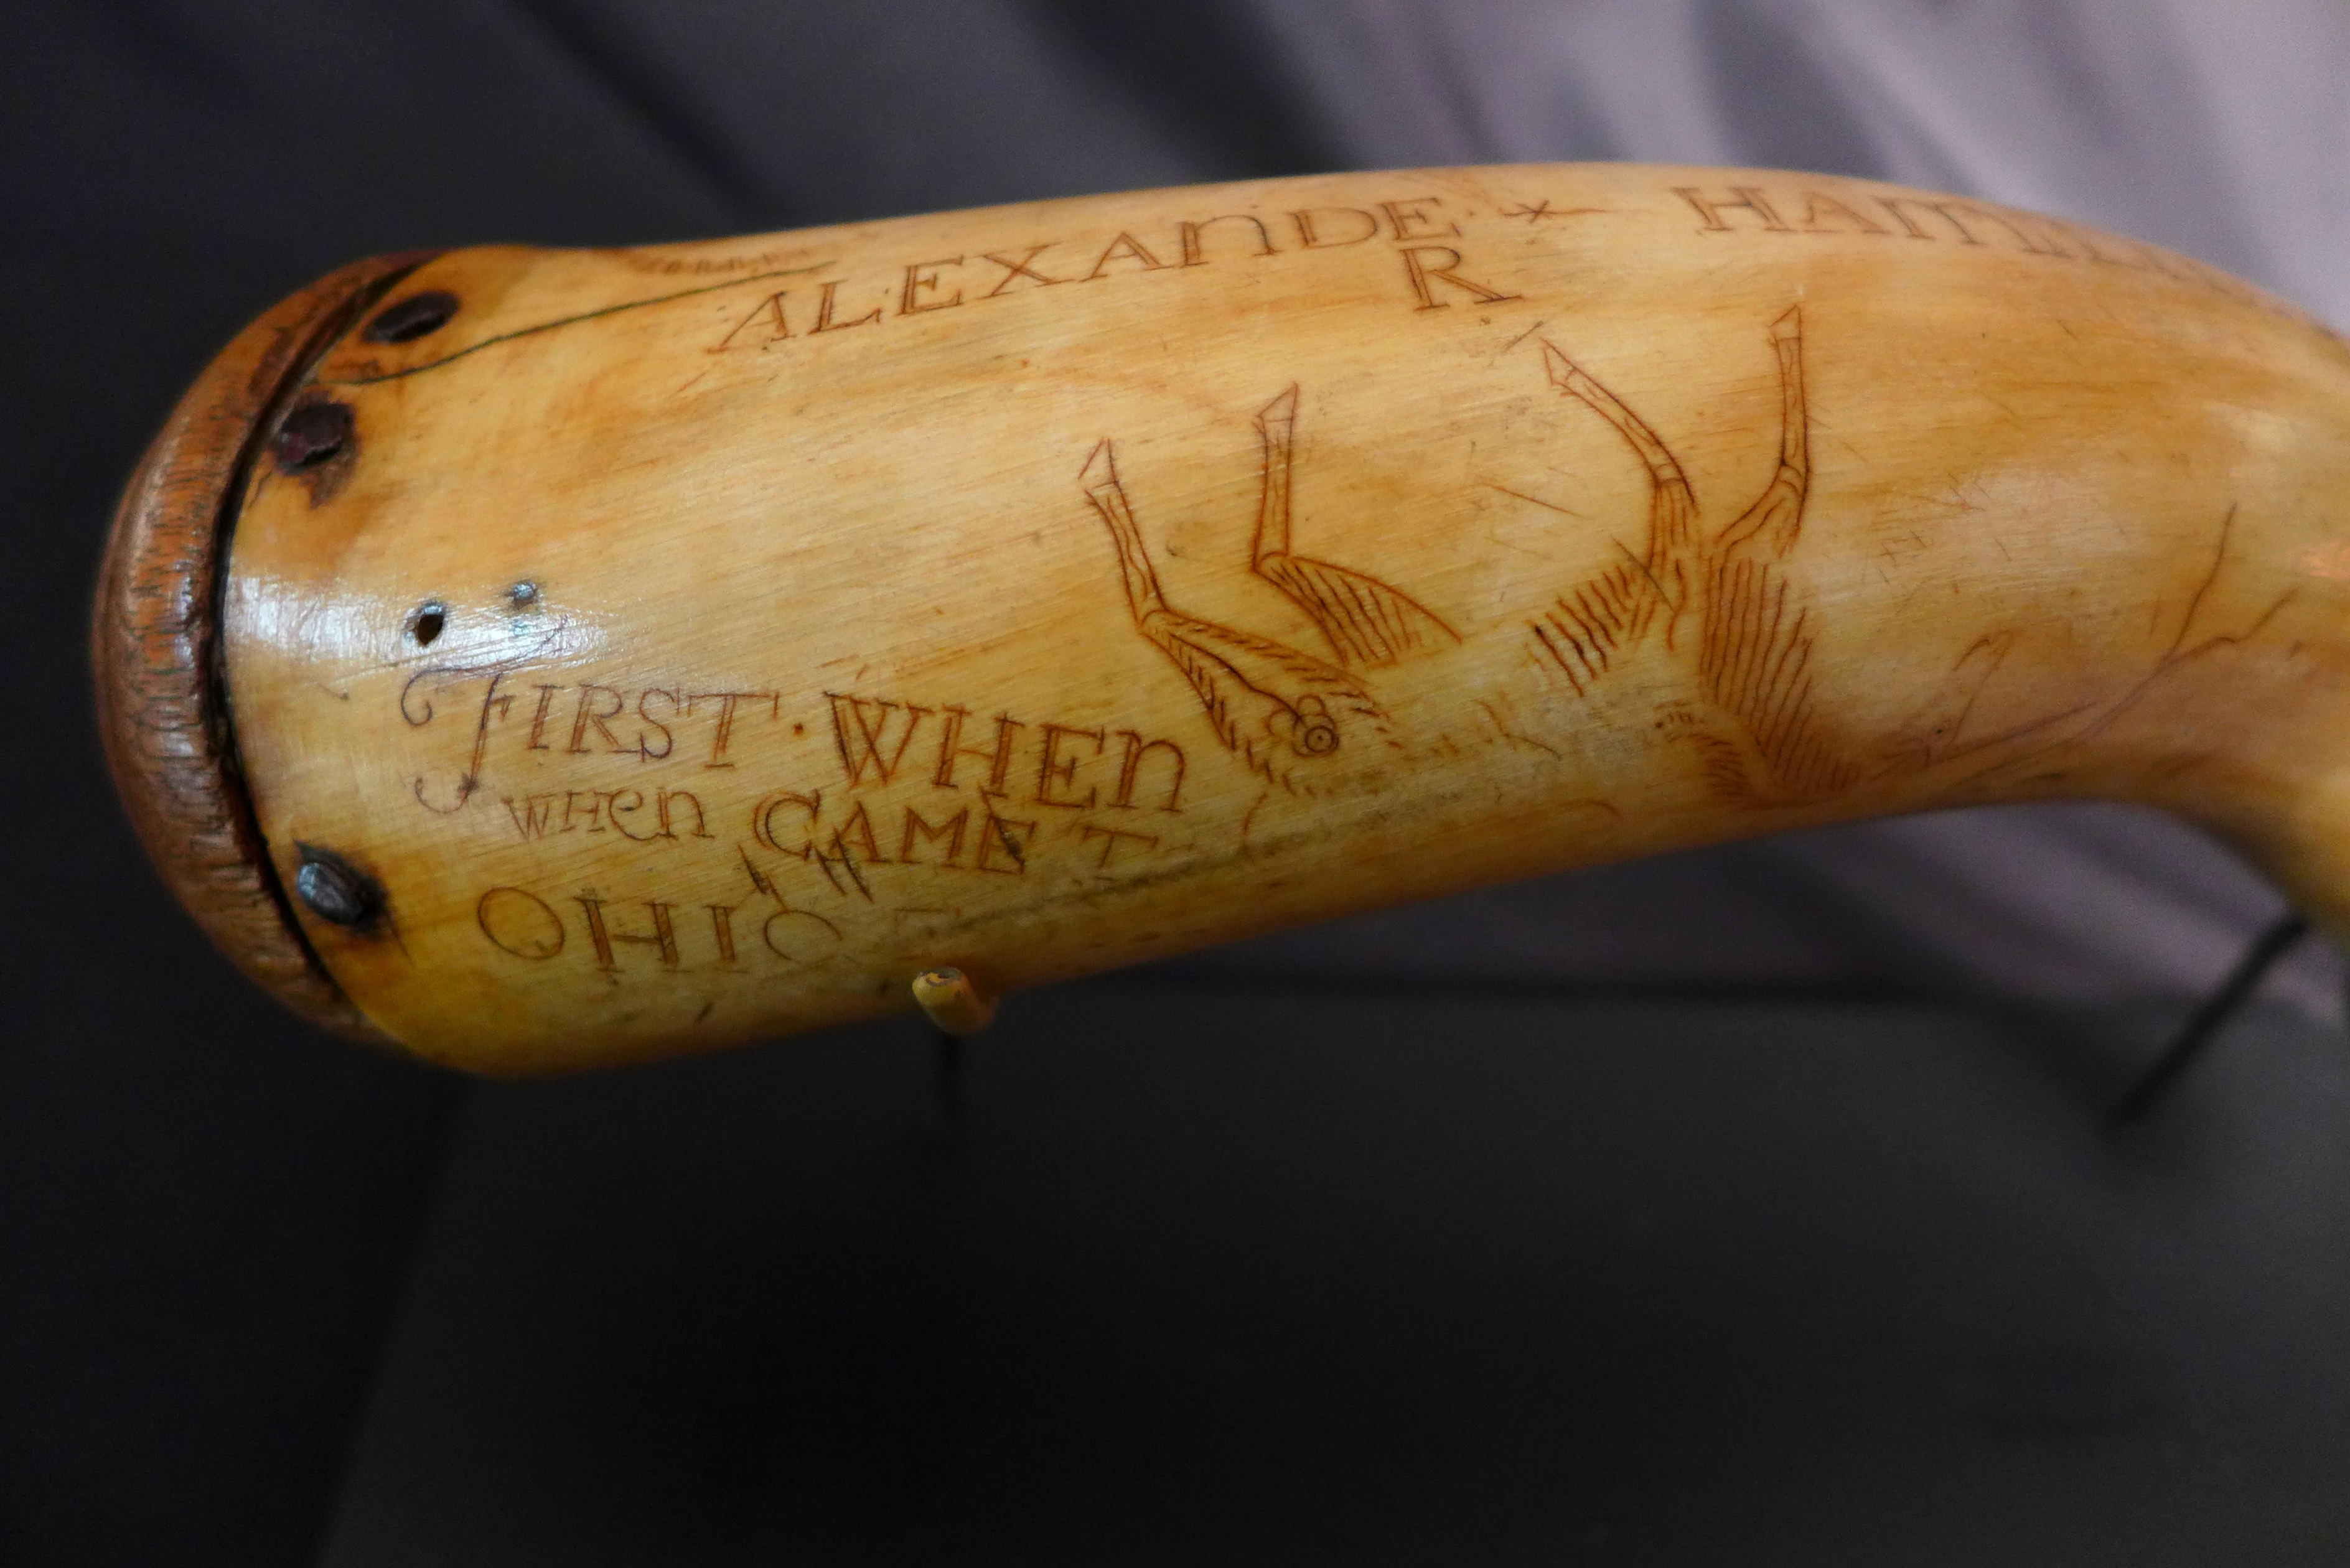 Alexander Hamilton’s powder horn to be auctioned Jan. 11